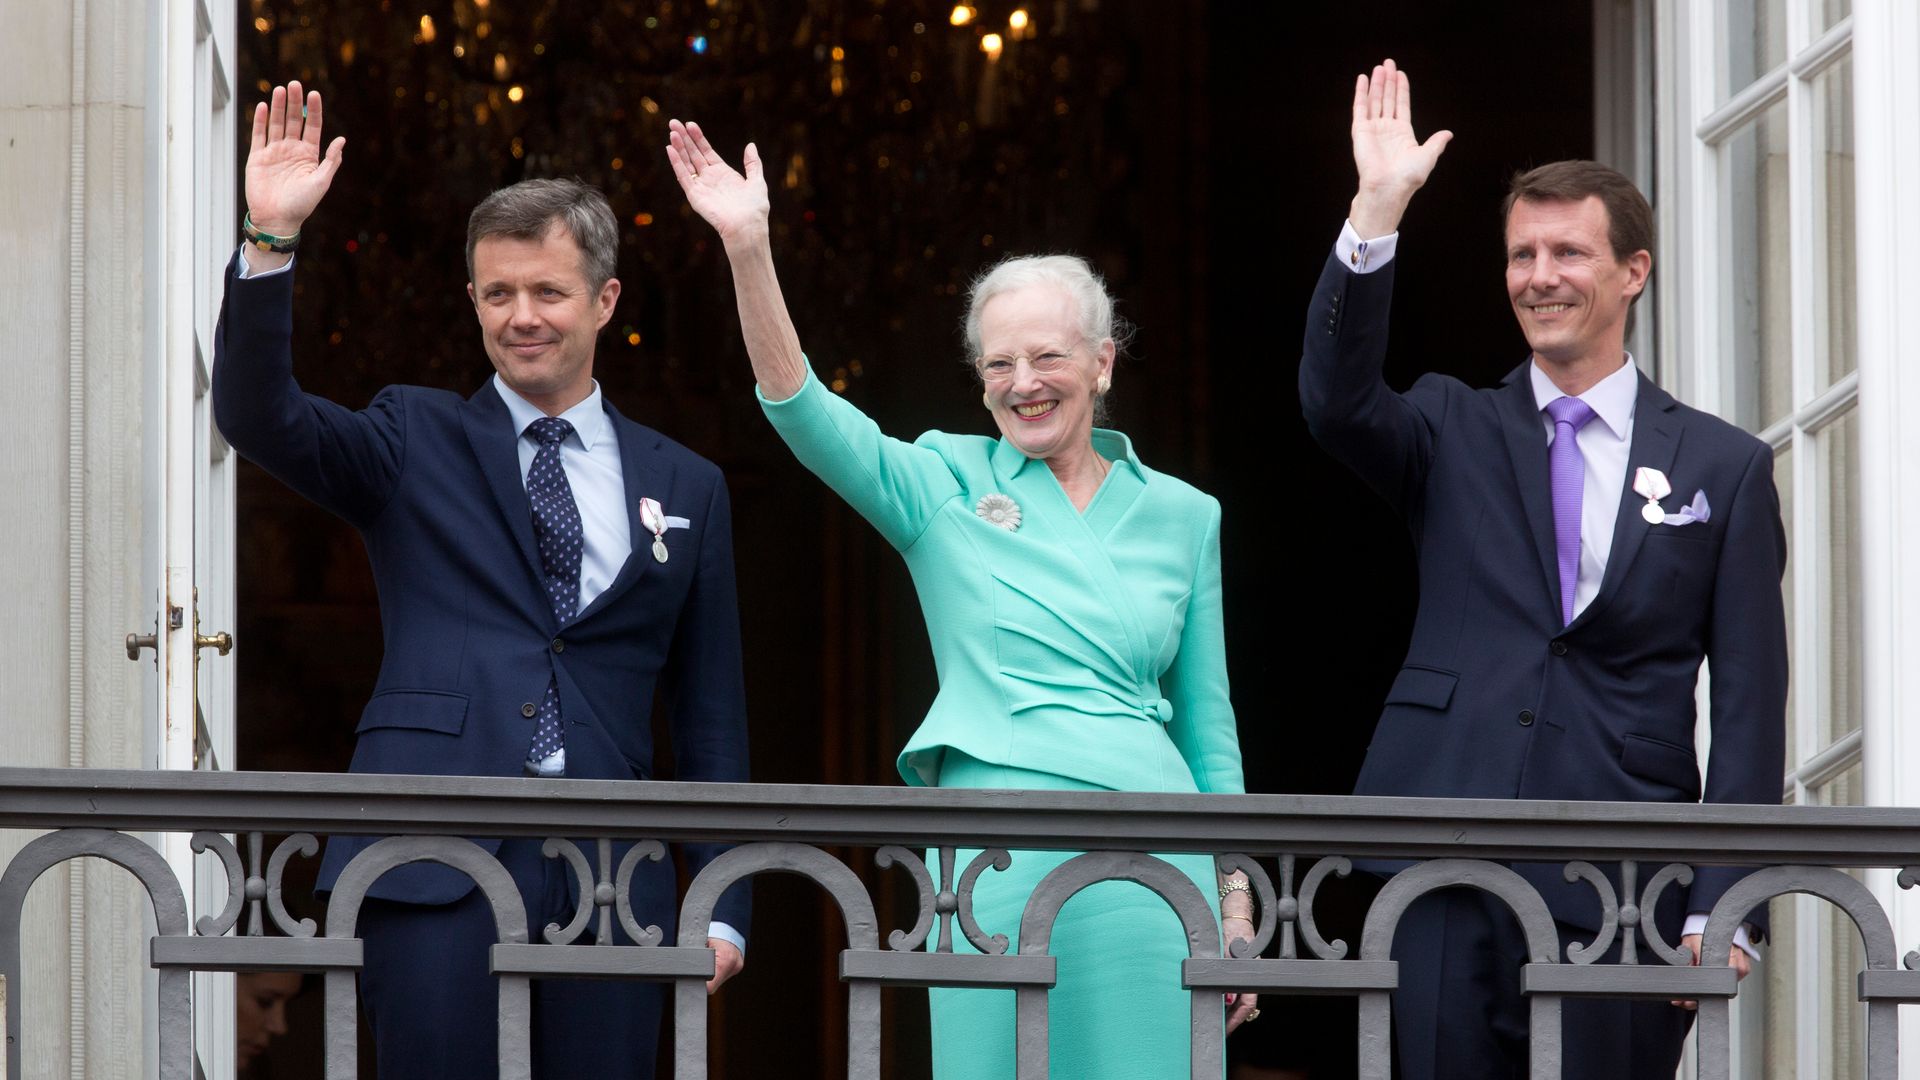 Queen Margrethe II of Denmark, and her sons Crown Prince Frederik of Denmark and Prince Joachim of Denmark 